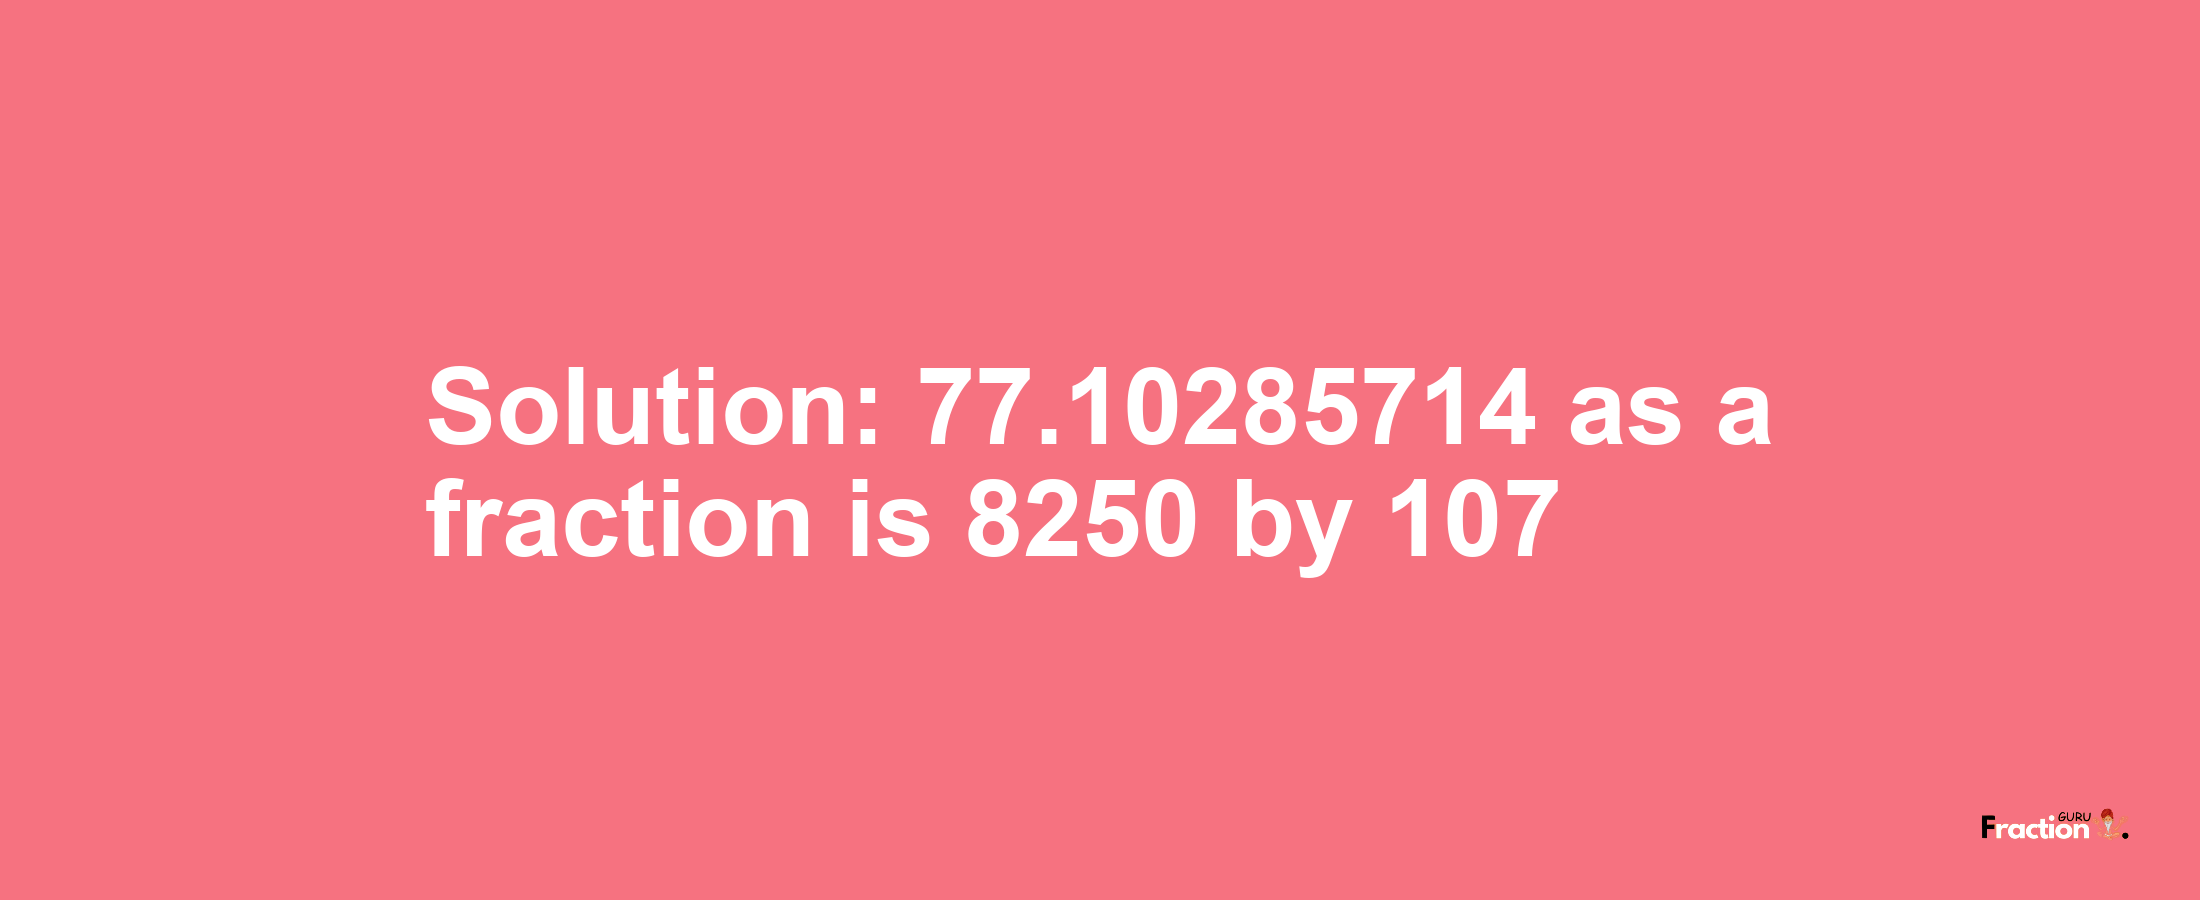 Solution:77.10285714 as a fraction is 8250/107